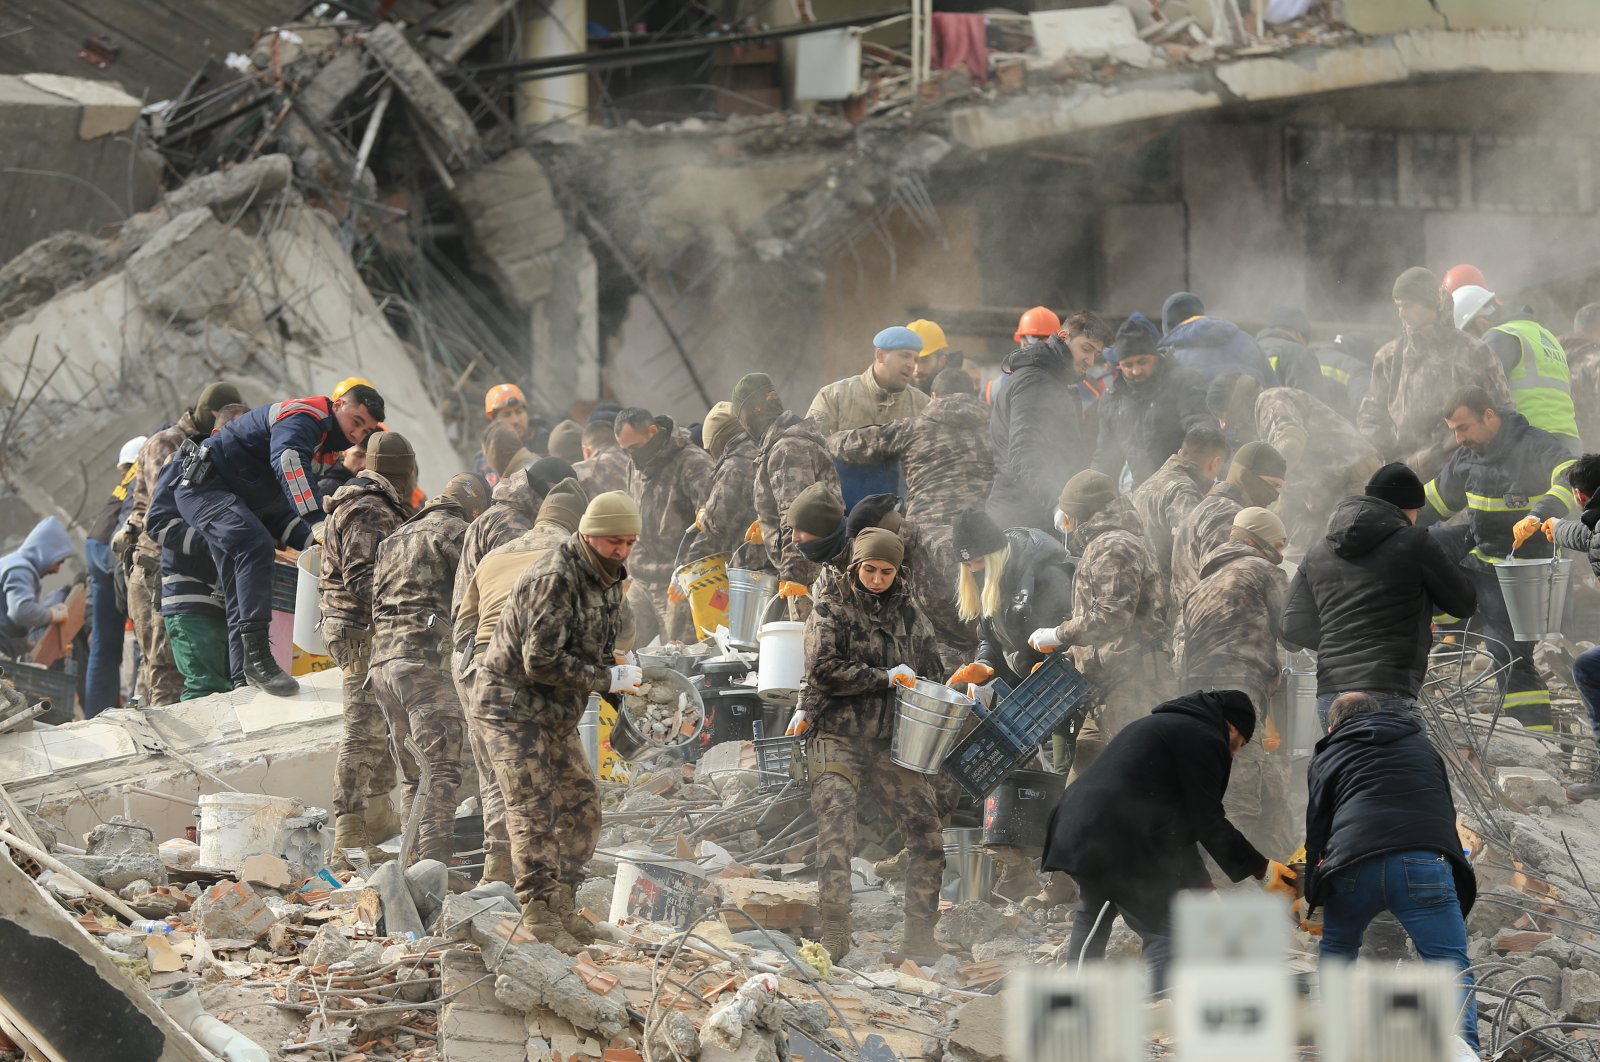 The rescue teams remove bodies from the debris of destroyed buildings in Gaziantep, Türkiye, Feb. 6, 2023. (AA Photo)